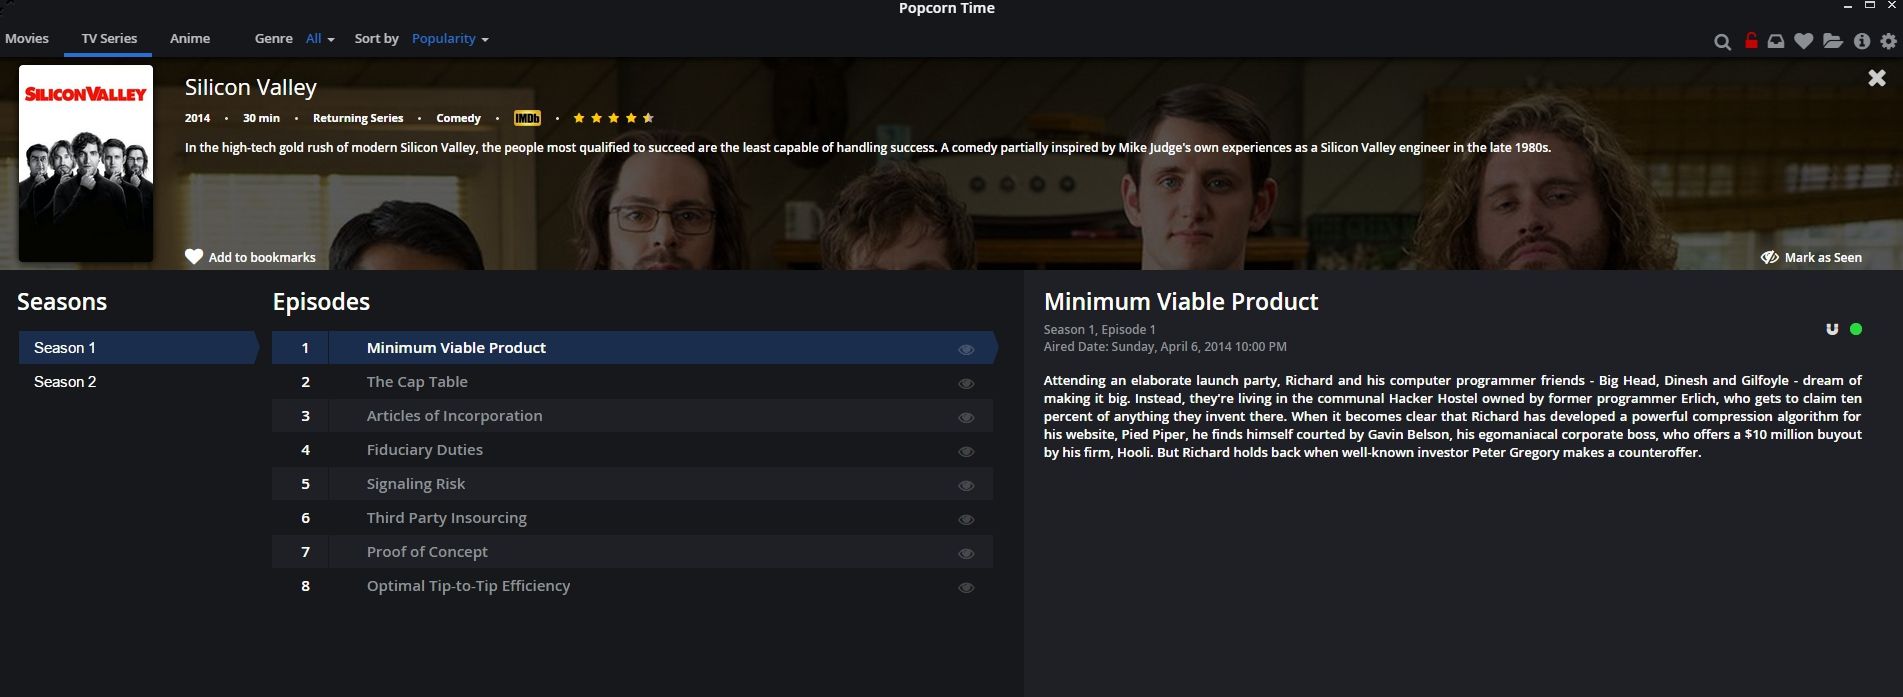 Project Free TV Alternatives Popcorn Time, Free Sports Streaming Sites Will Fill Piracy Gap After Relocation Confusion